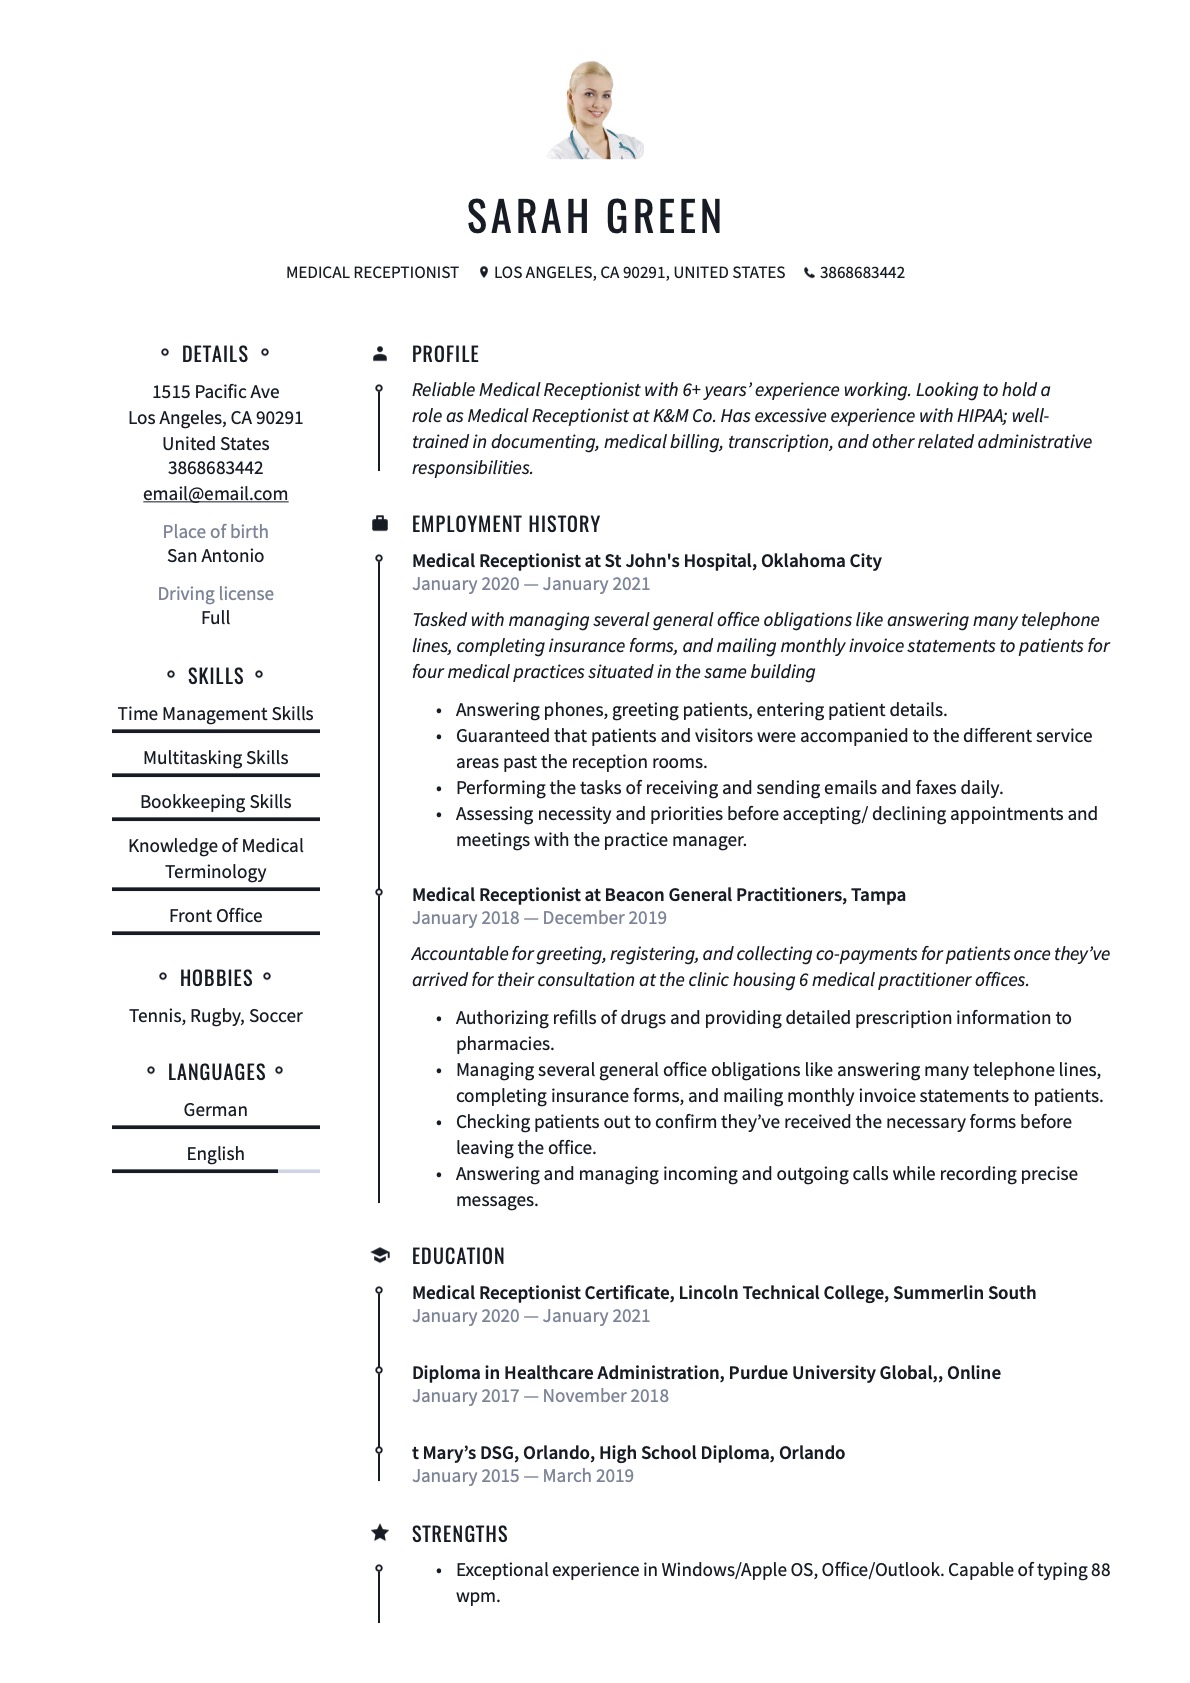 Example Resume Medical Receptionist-2